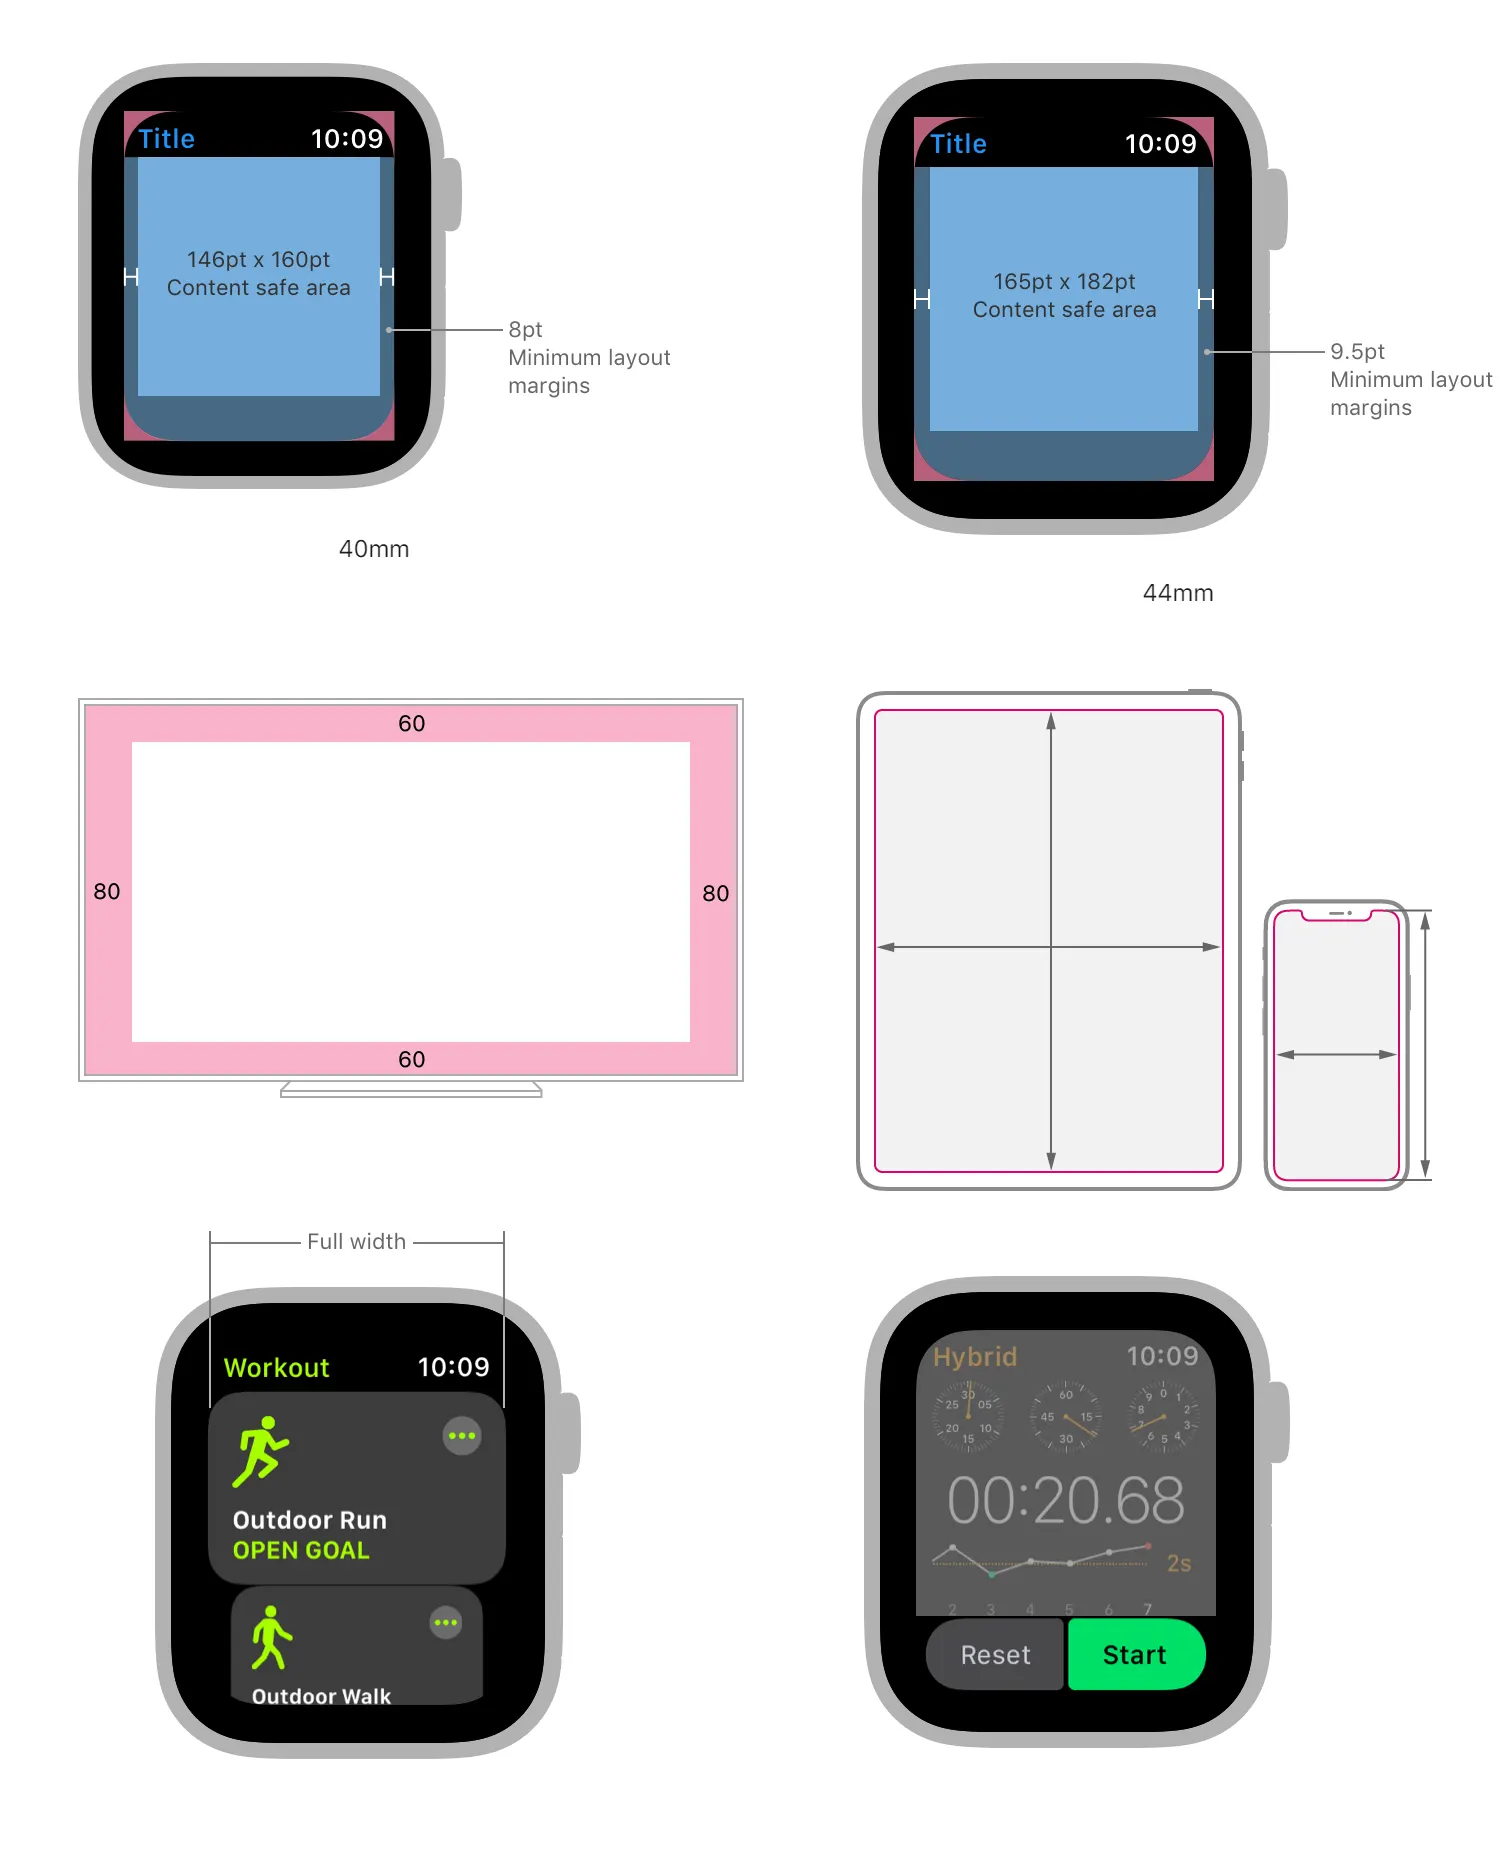 layout and margins on apple watch, apple TV, mobile and table 